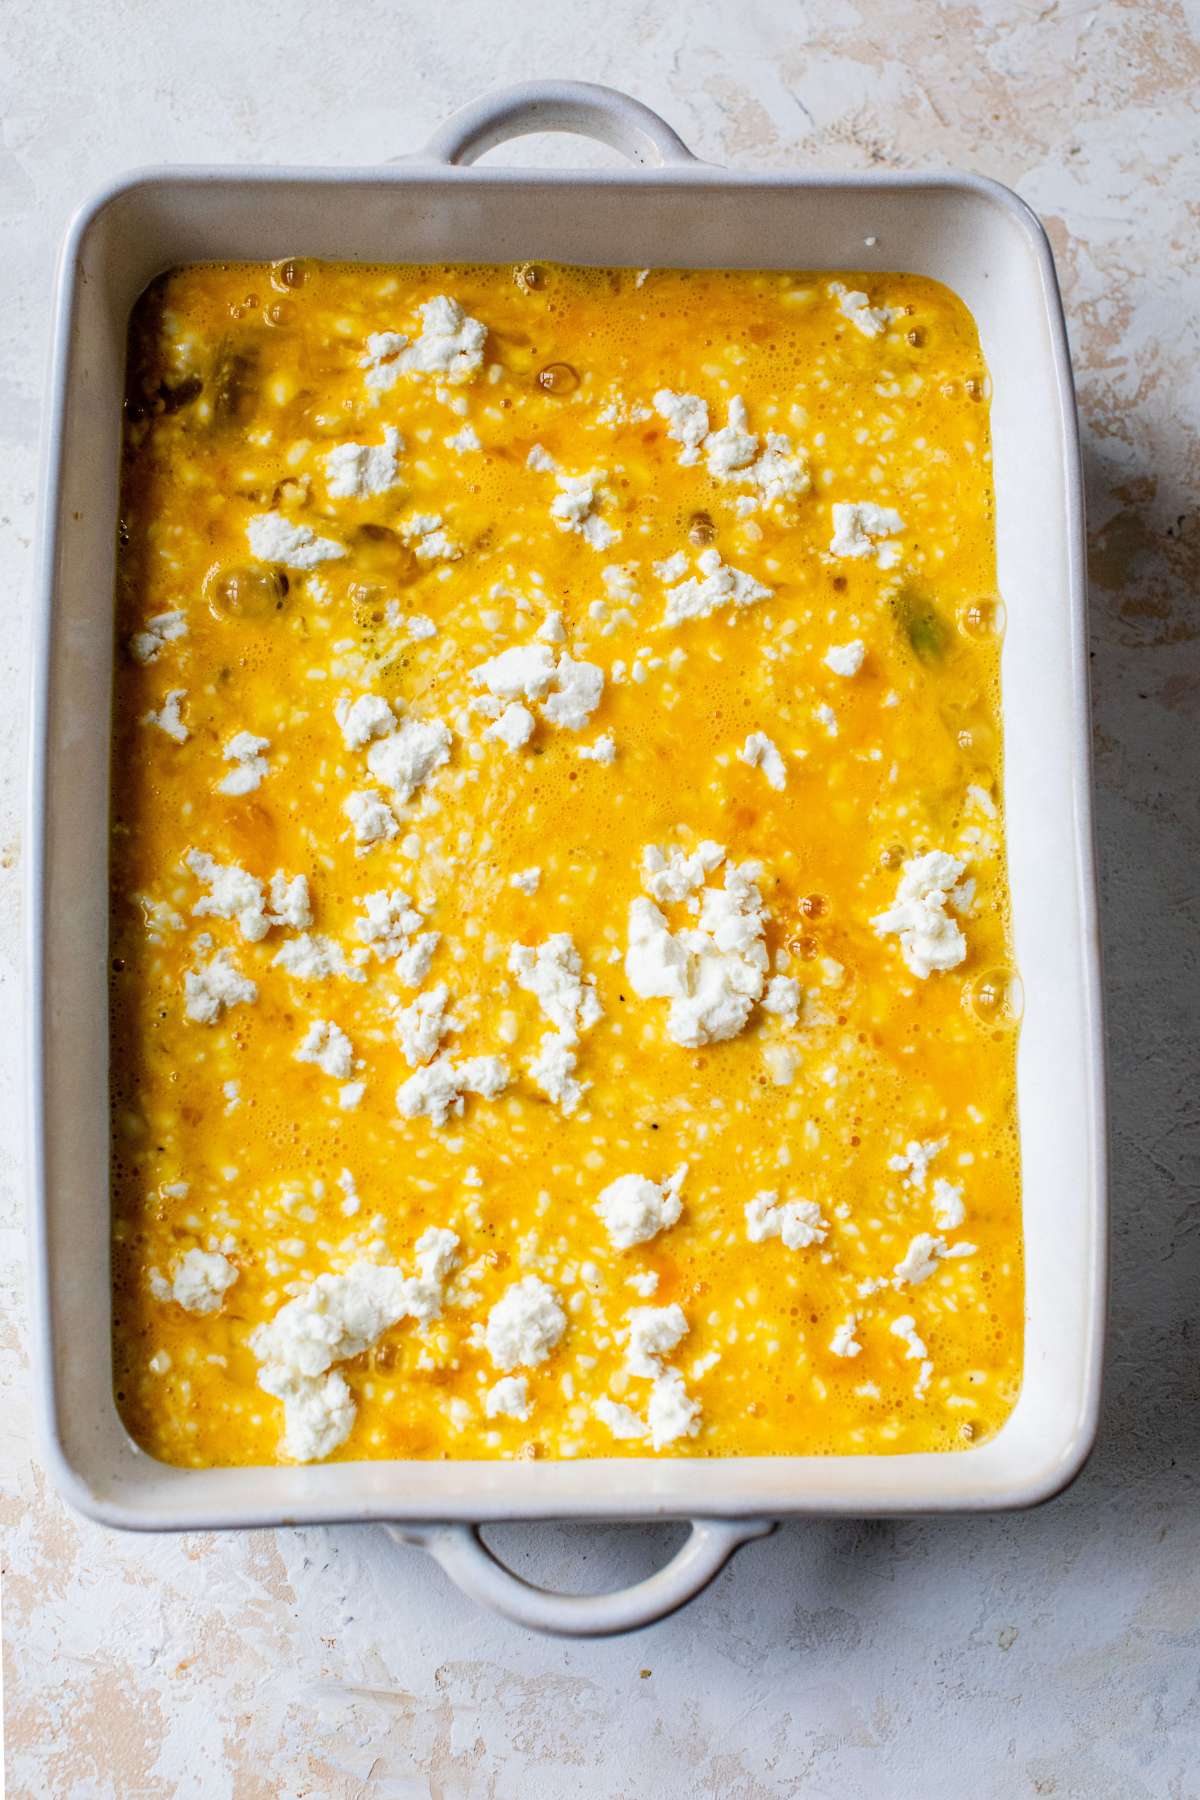 Pour eggs into dish and sprinkle with feta cheese.